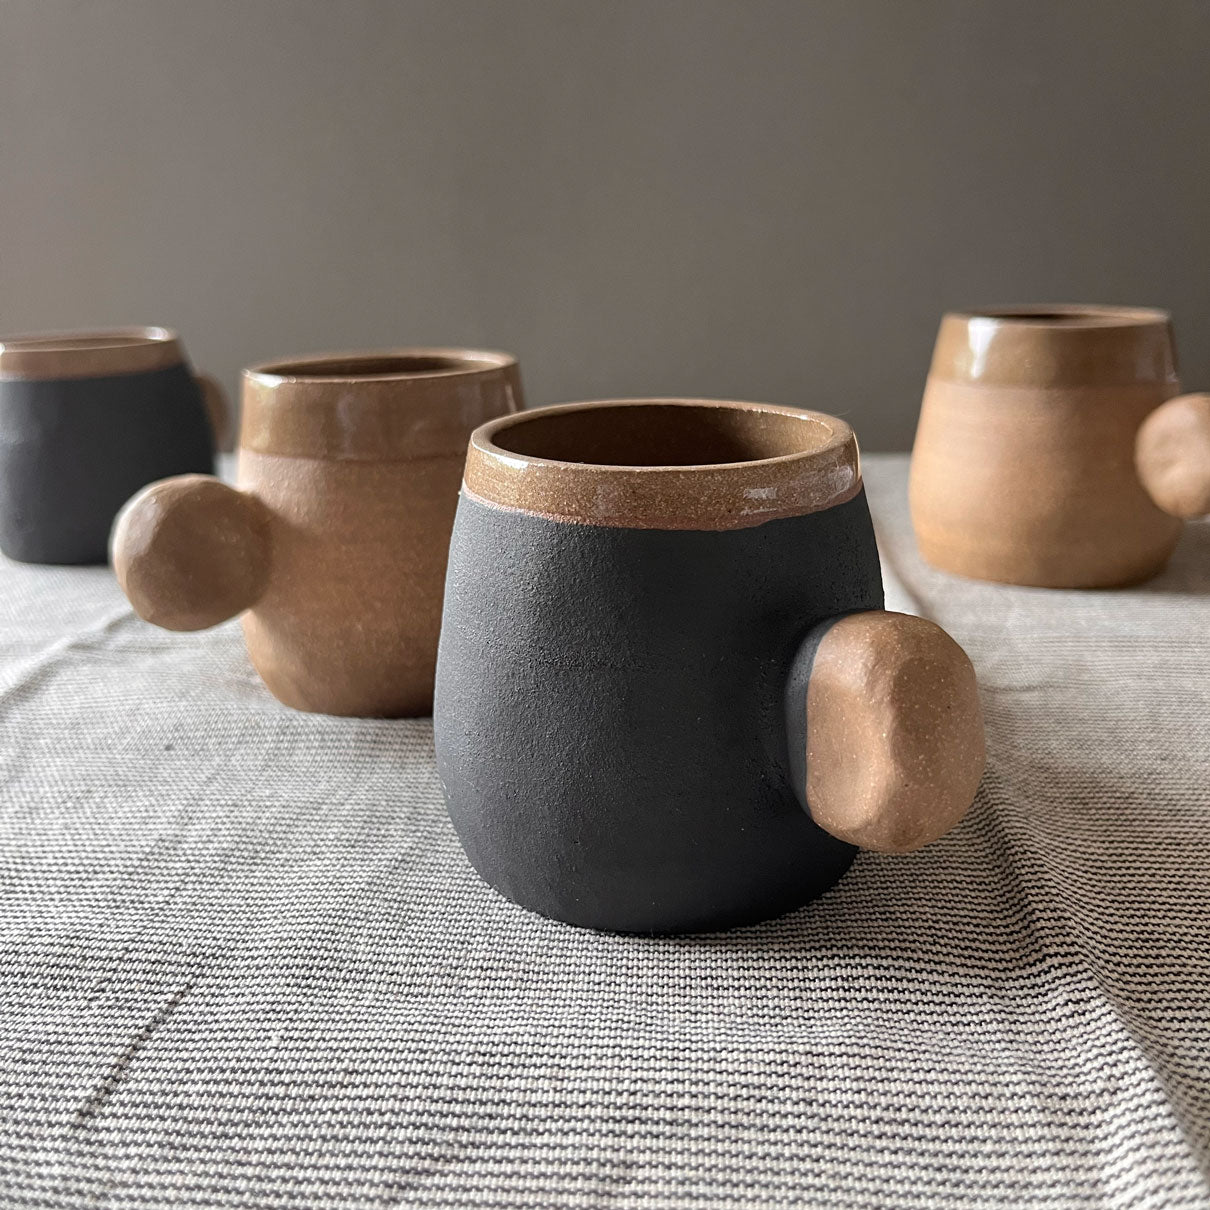 An elegant bulbous body form in brown stoneware, featuring a hammered raw texture. Black underglazed exterior that has a volcanic rock texture, with a clear glazed lip and interior. 